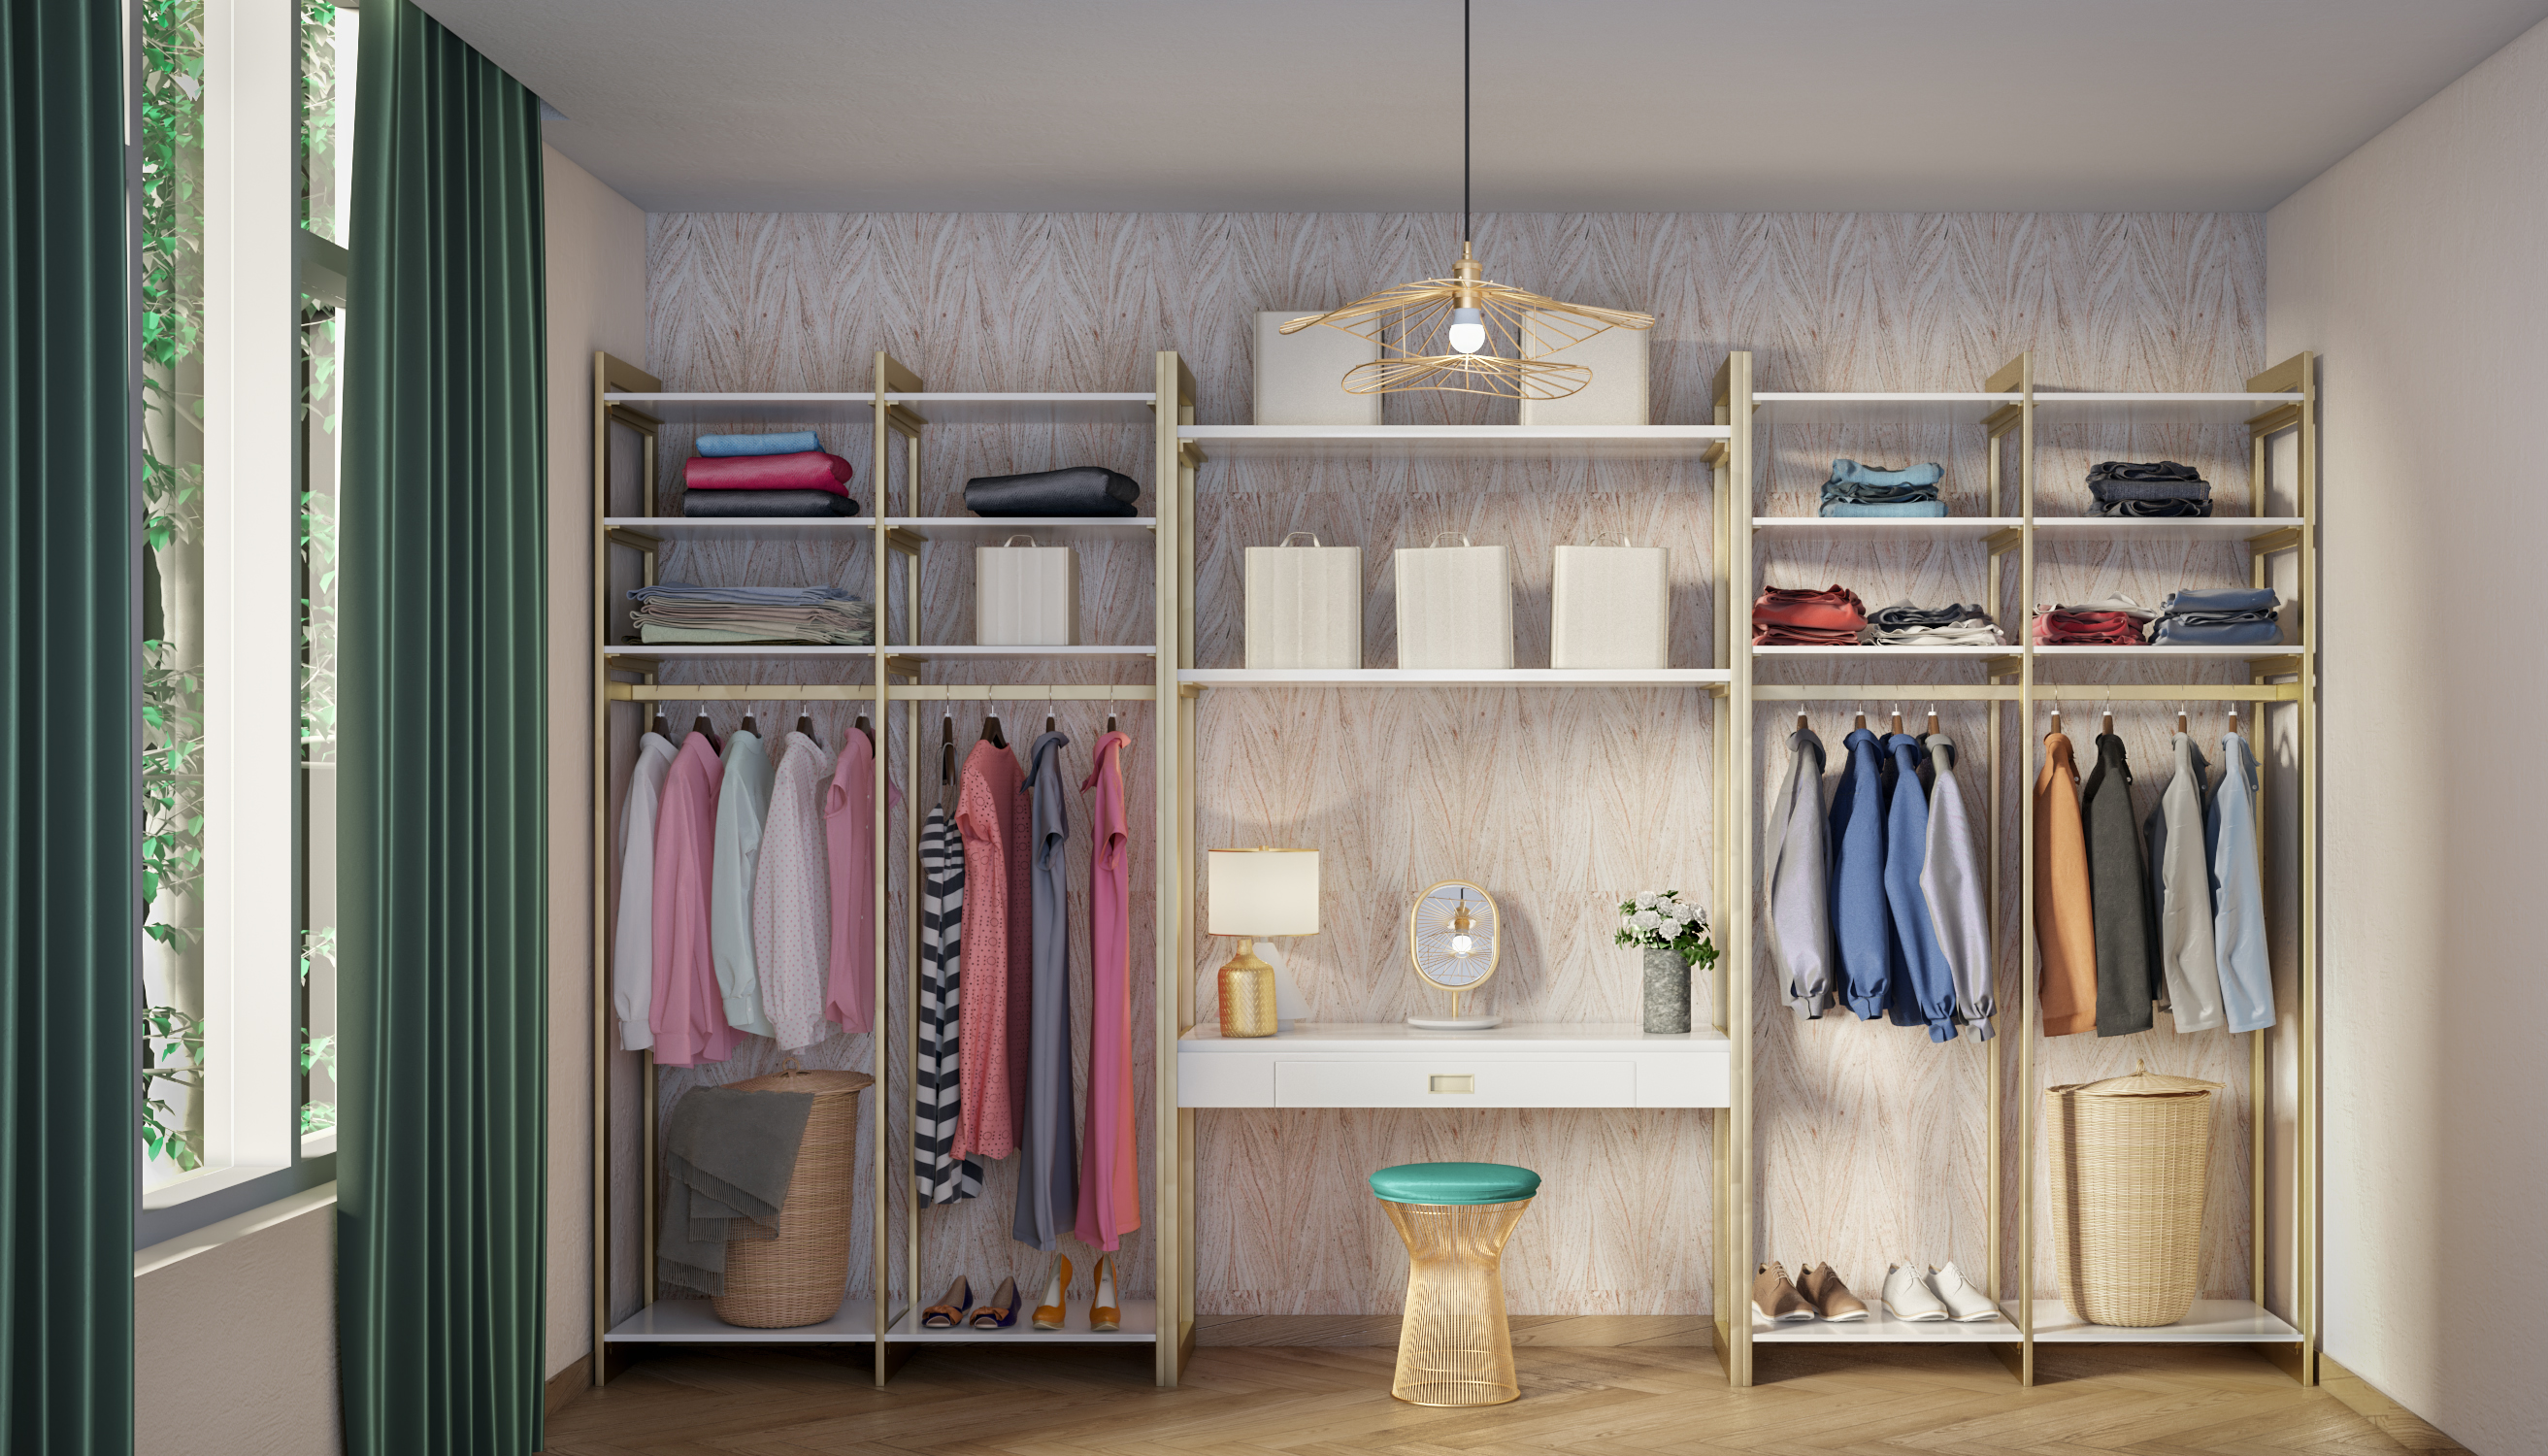 Modern Spacious Open Wardrobe Design with Dresser and Shelves